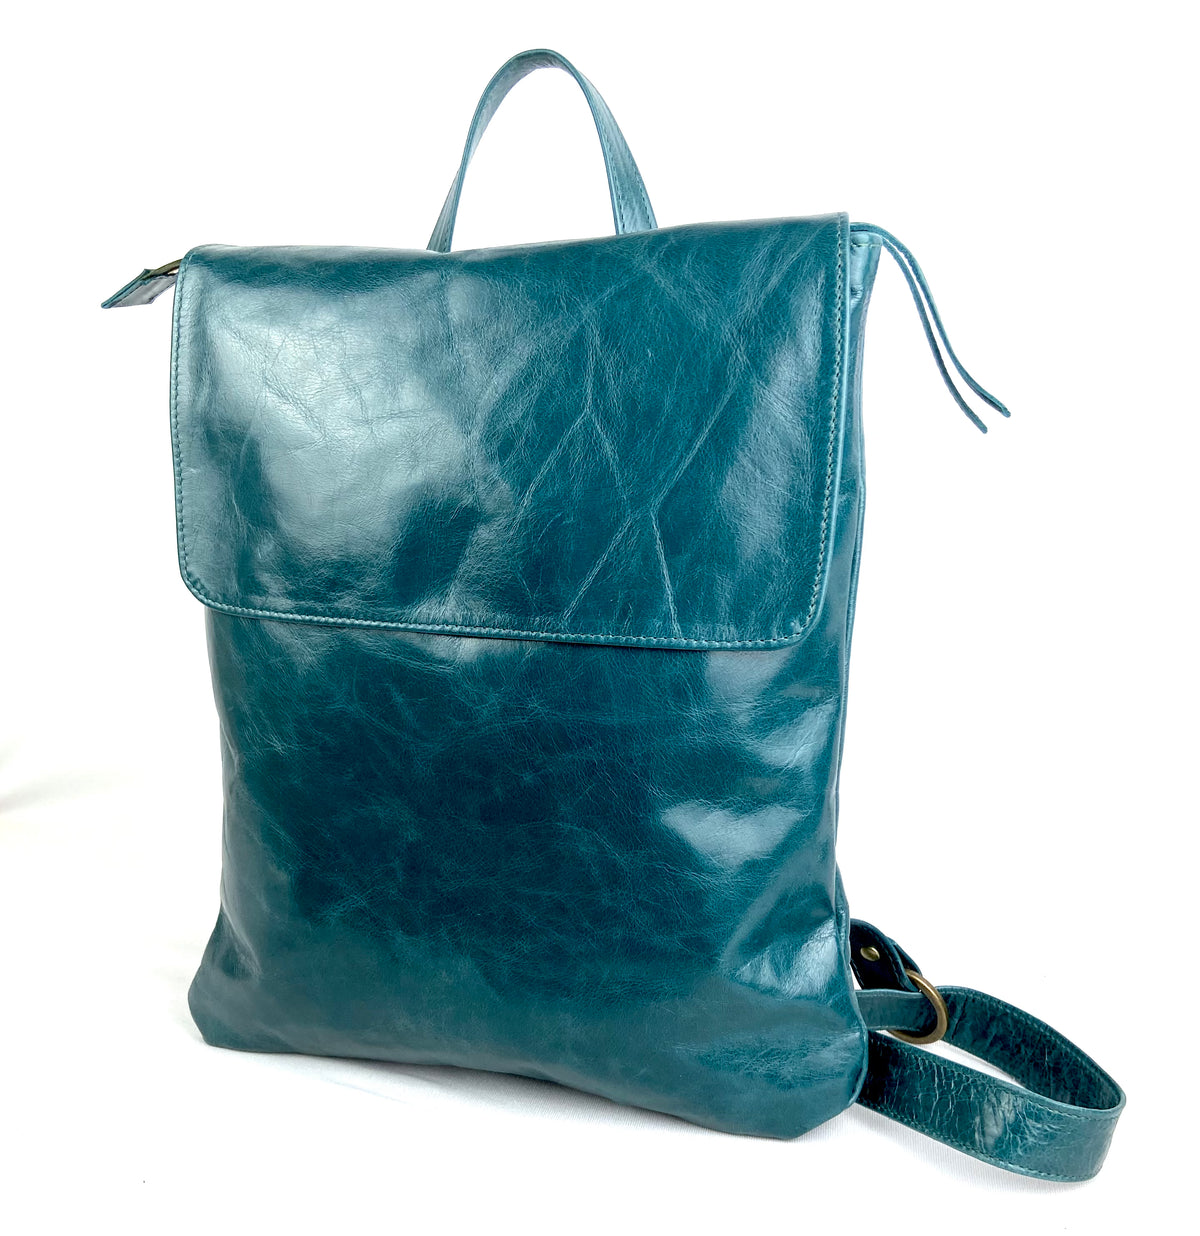 Dinky Pal rucksack in Teal Glazed Leather